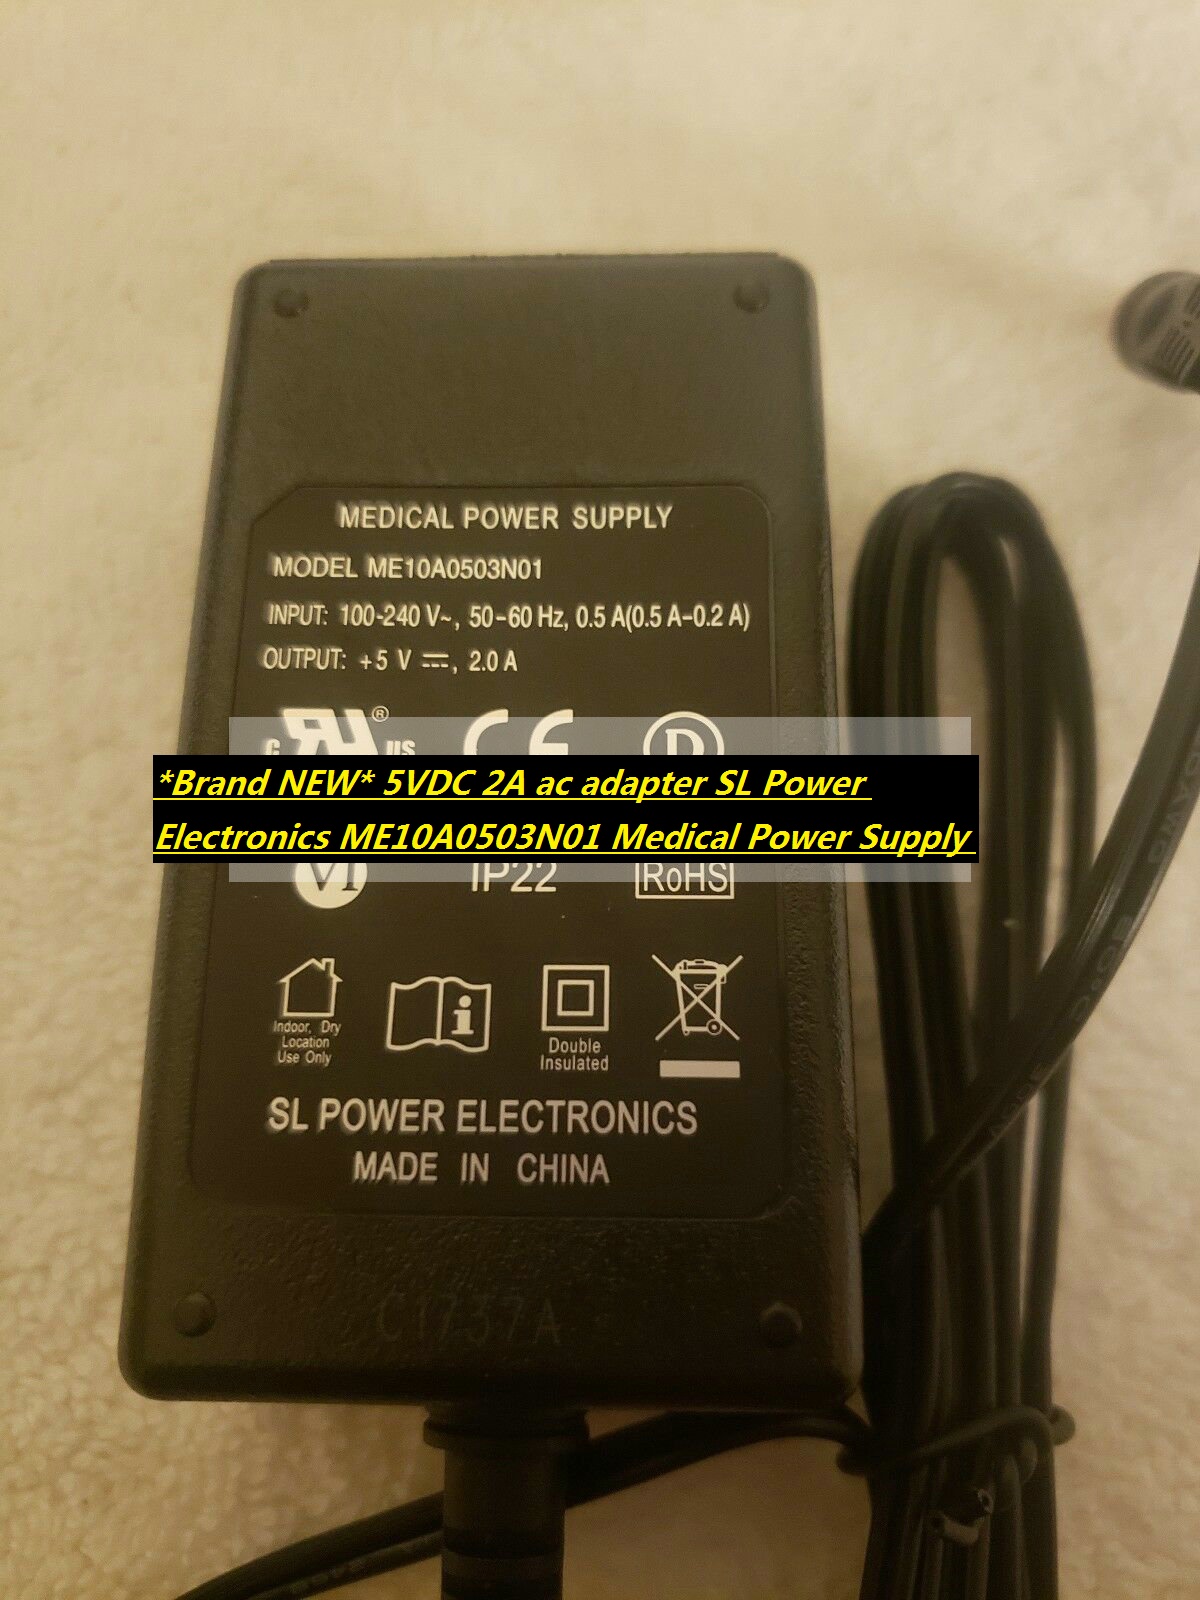 *Brand NEW* 5VDC 2A ac adapter SL Power Electronics ME10A0503N01 Medical Power Supply